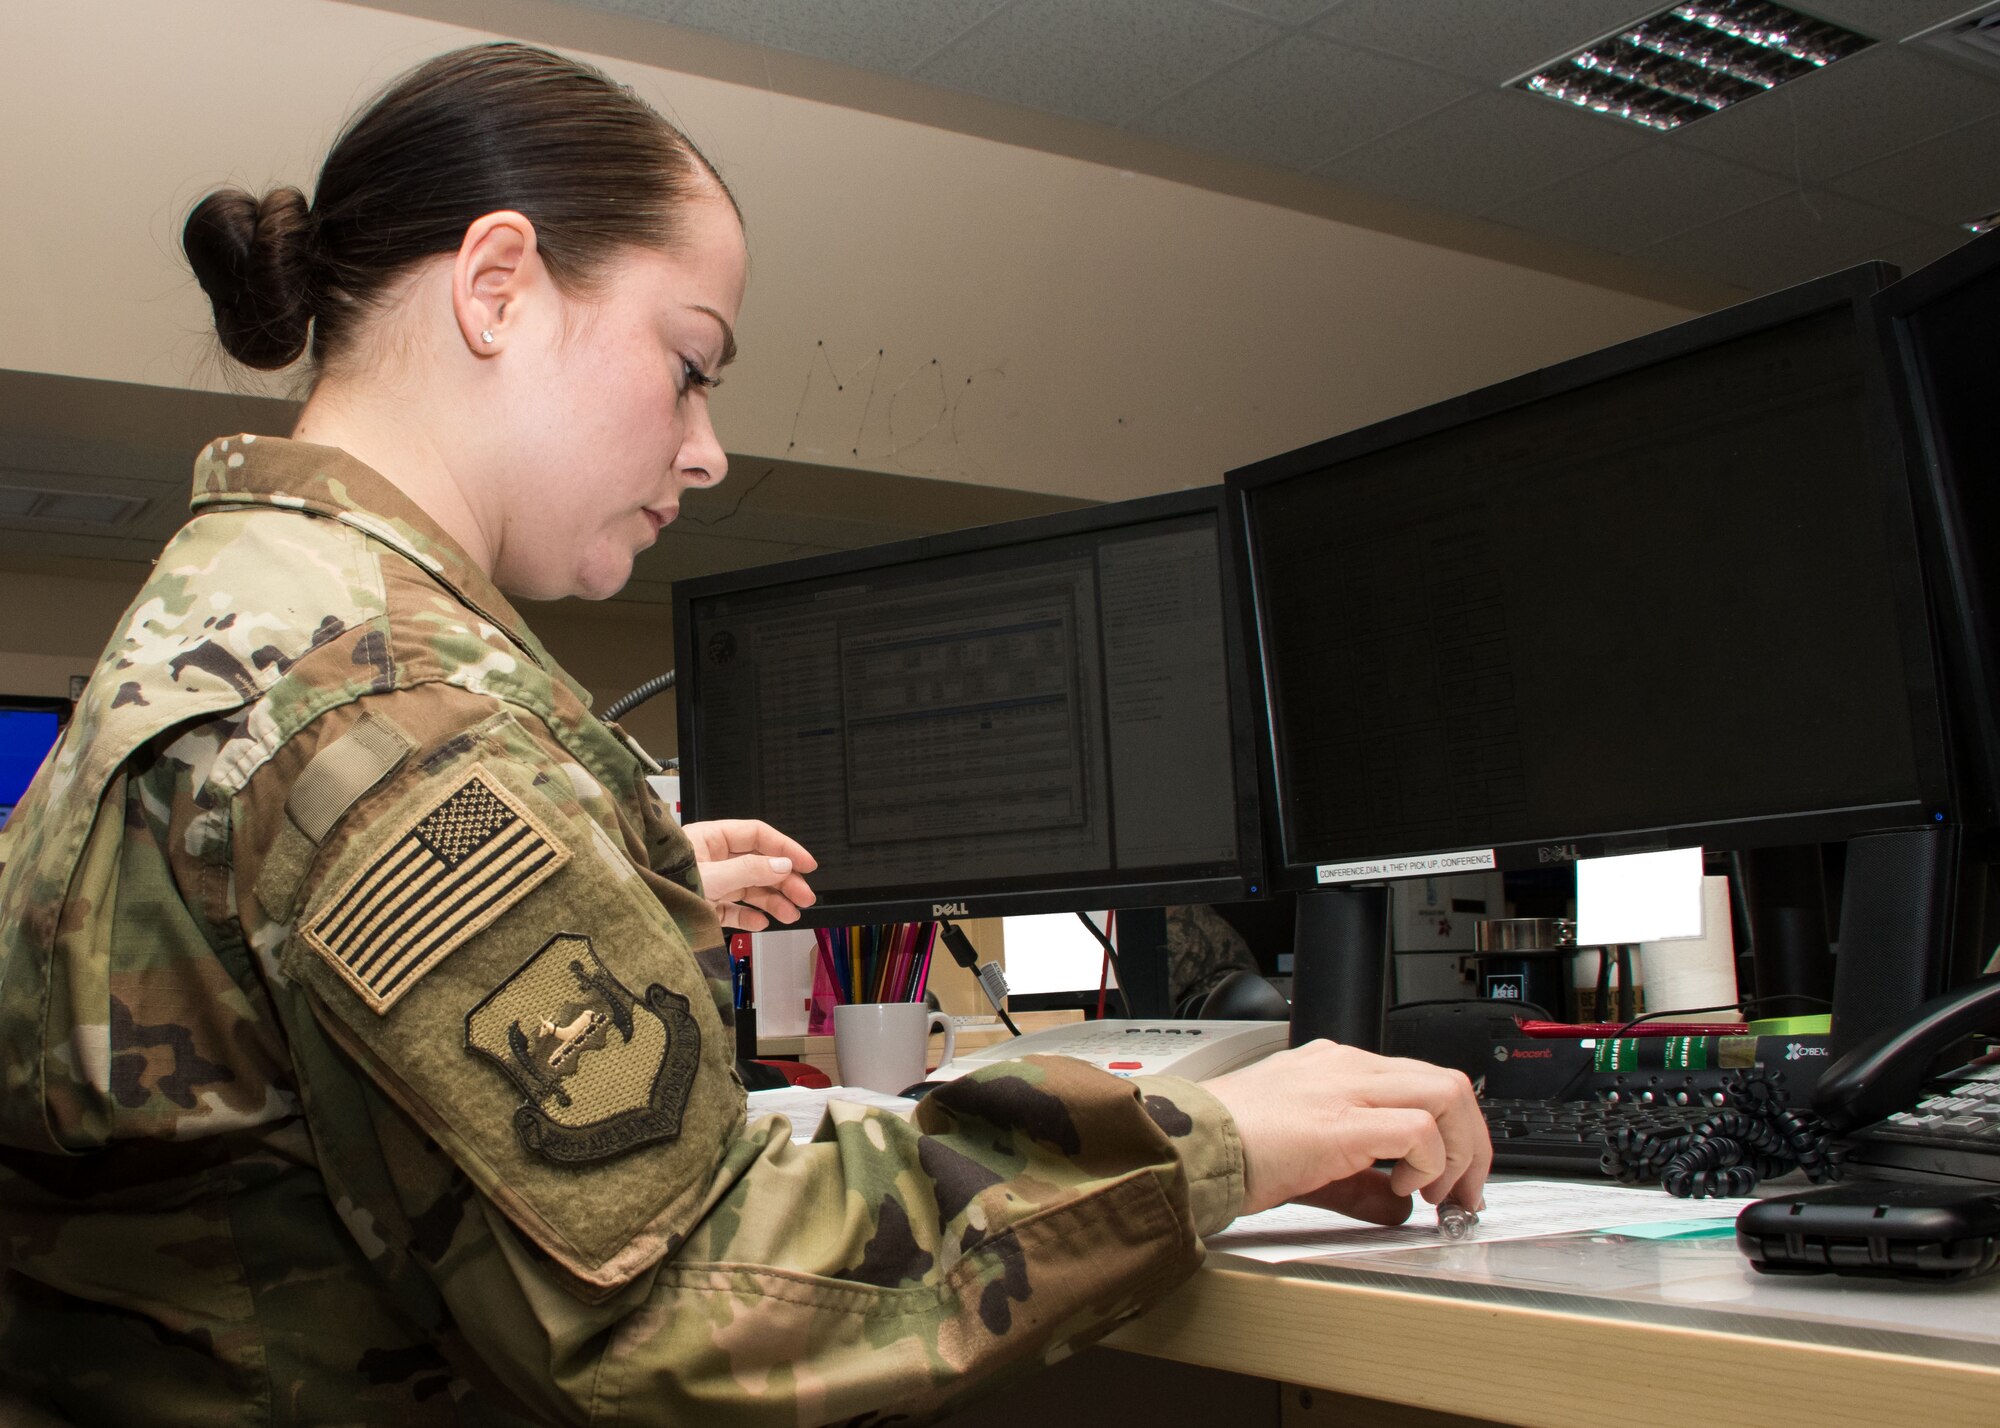 Senior Airman Laurin Curtis, a 386th AEW emergency action controller, works at a console in the command post March 15, 2017. “One thing I think that I’m really fortunate in is to be able to see the mission as a whole from a bird’s eye view...,” said Curtis. (U.S. Air Force photo illustration/Senior Airman Andrew Park)